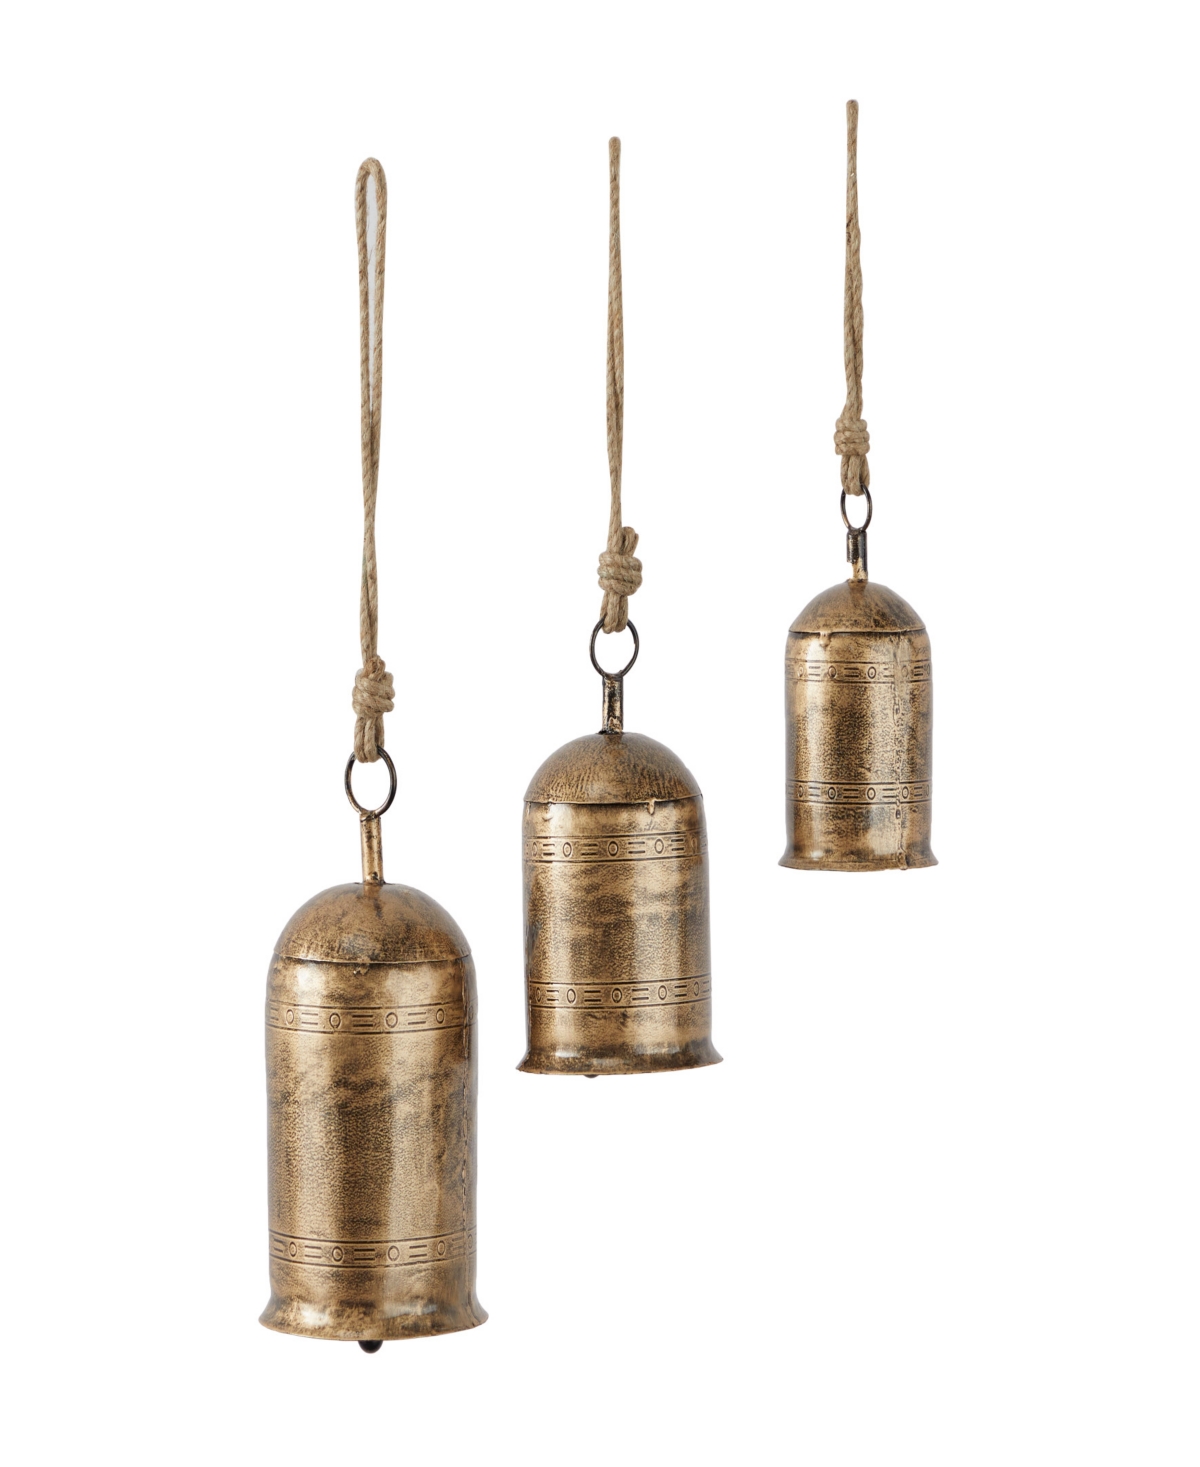 Rosemary Lane Gold-tone Metal Bohemian Decorative Cow Bell With Jute Hanging Rope Set 3 Pieces